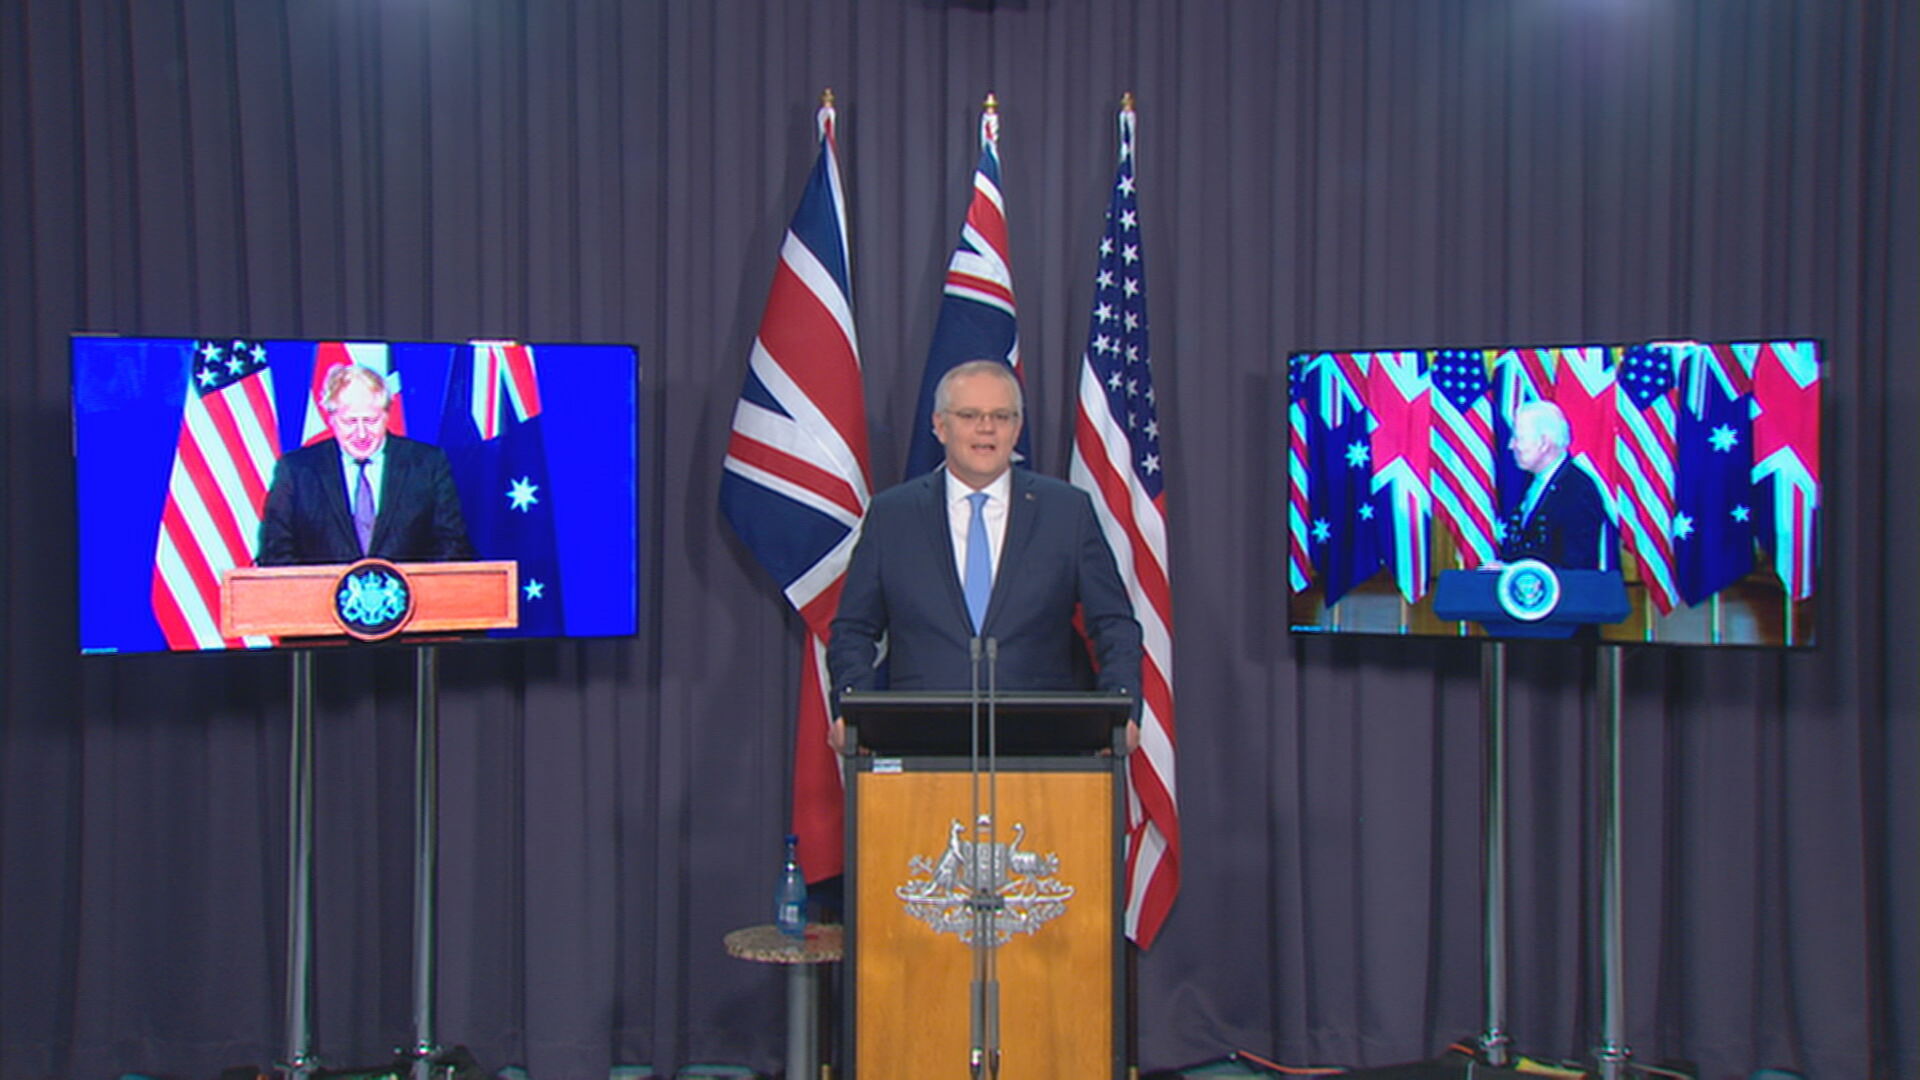 Prime Minister Scott Morrison announced the new defence pact in a joint virtual media conference with Joe Biden and Boris Johnson.